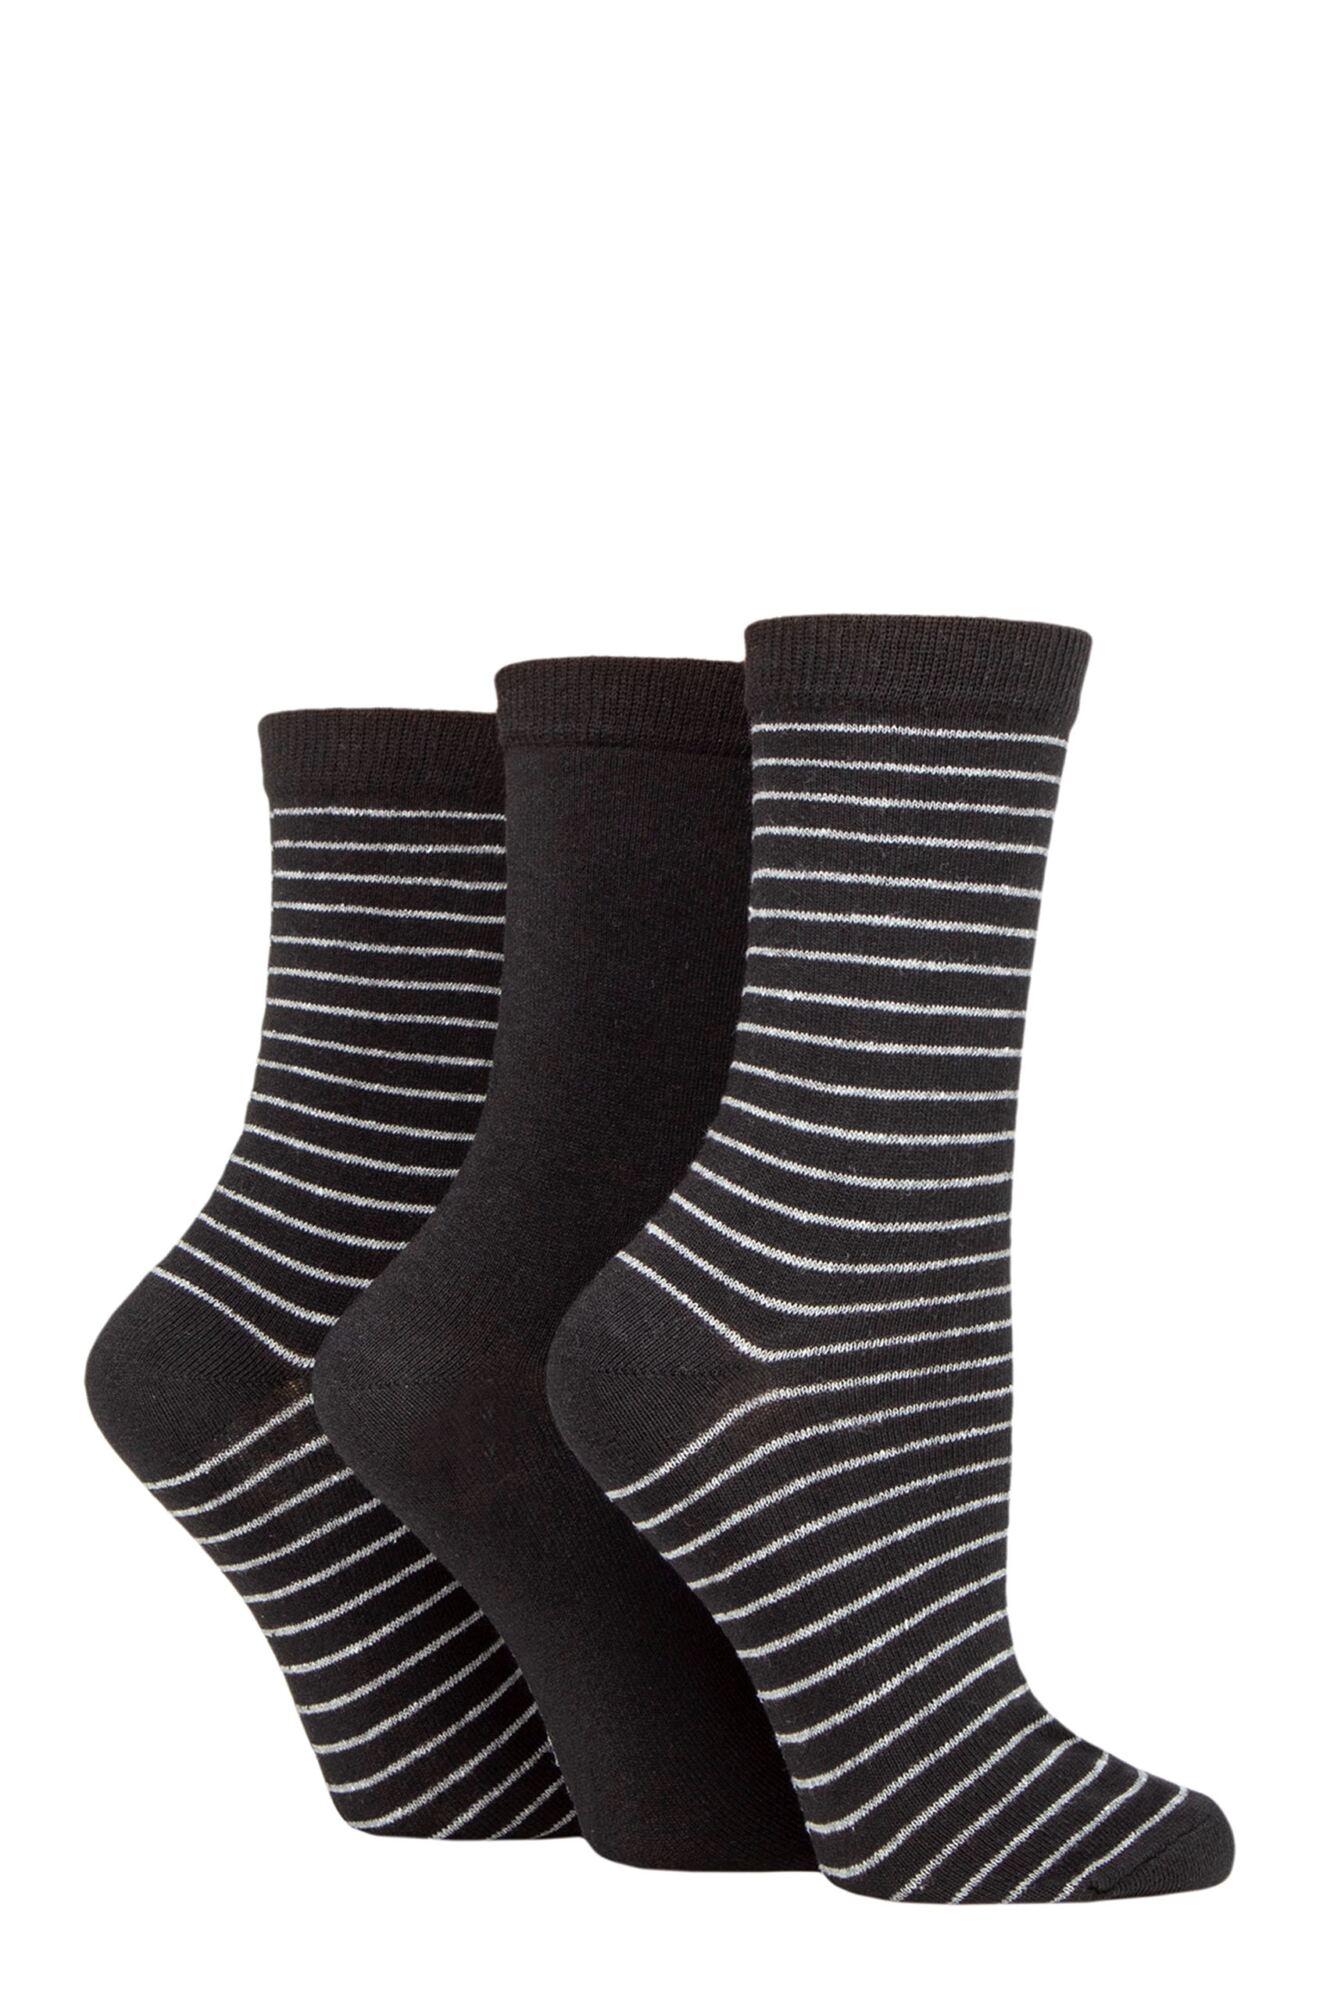 TORE 3Pk 100% Recycled Cotton Striped Socks-Womens 4-8